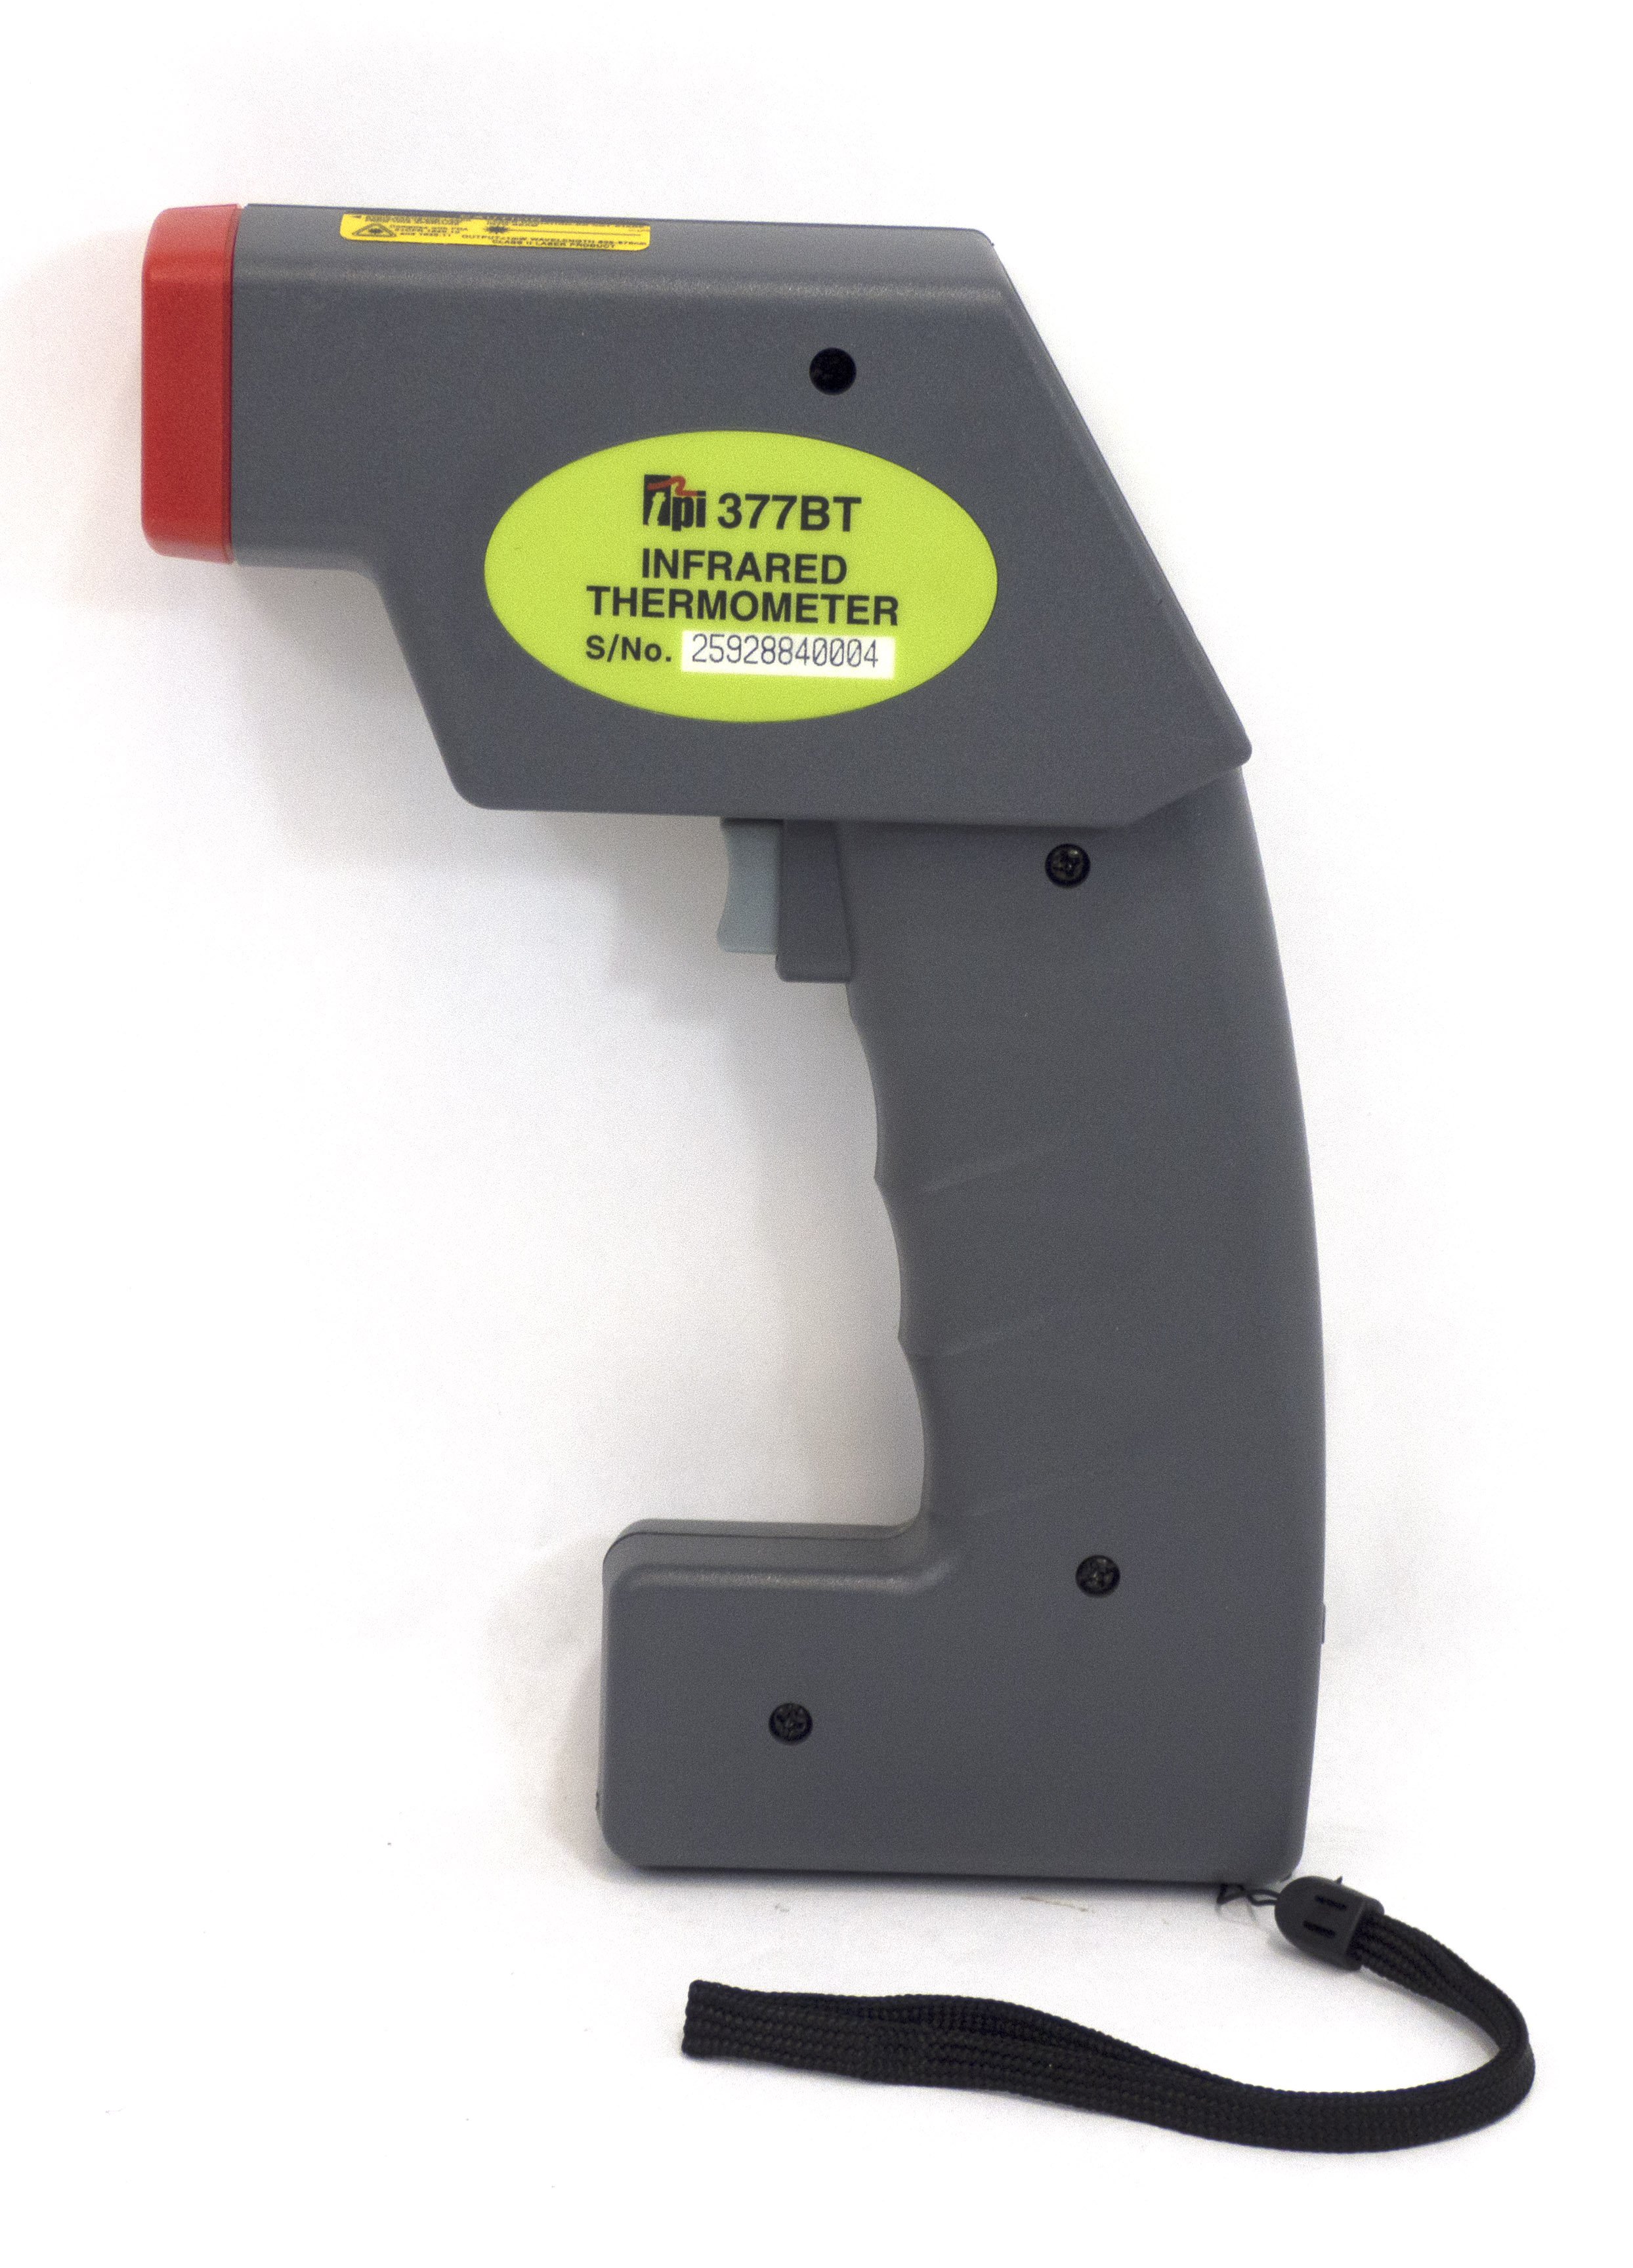 377BT Bluetooth Enabled Infrared Thermometer | TPI USA